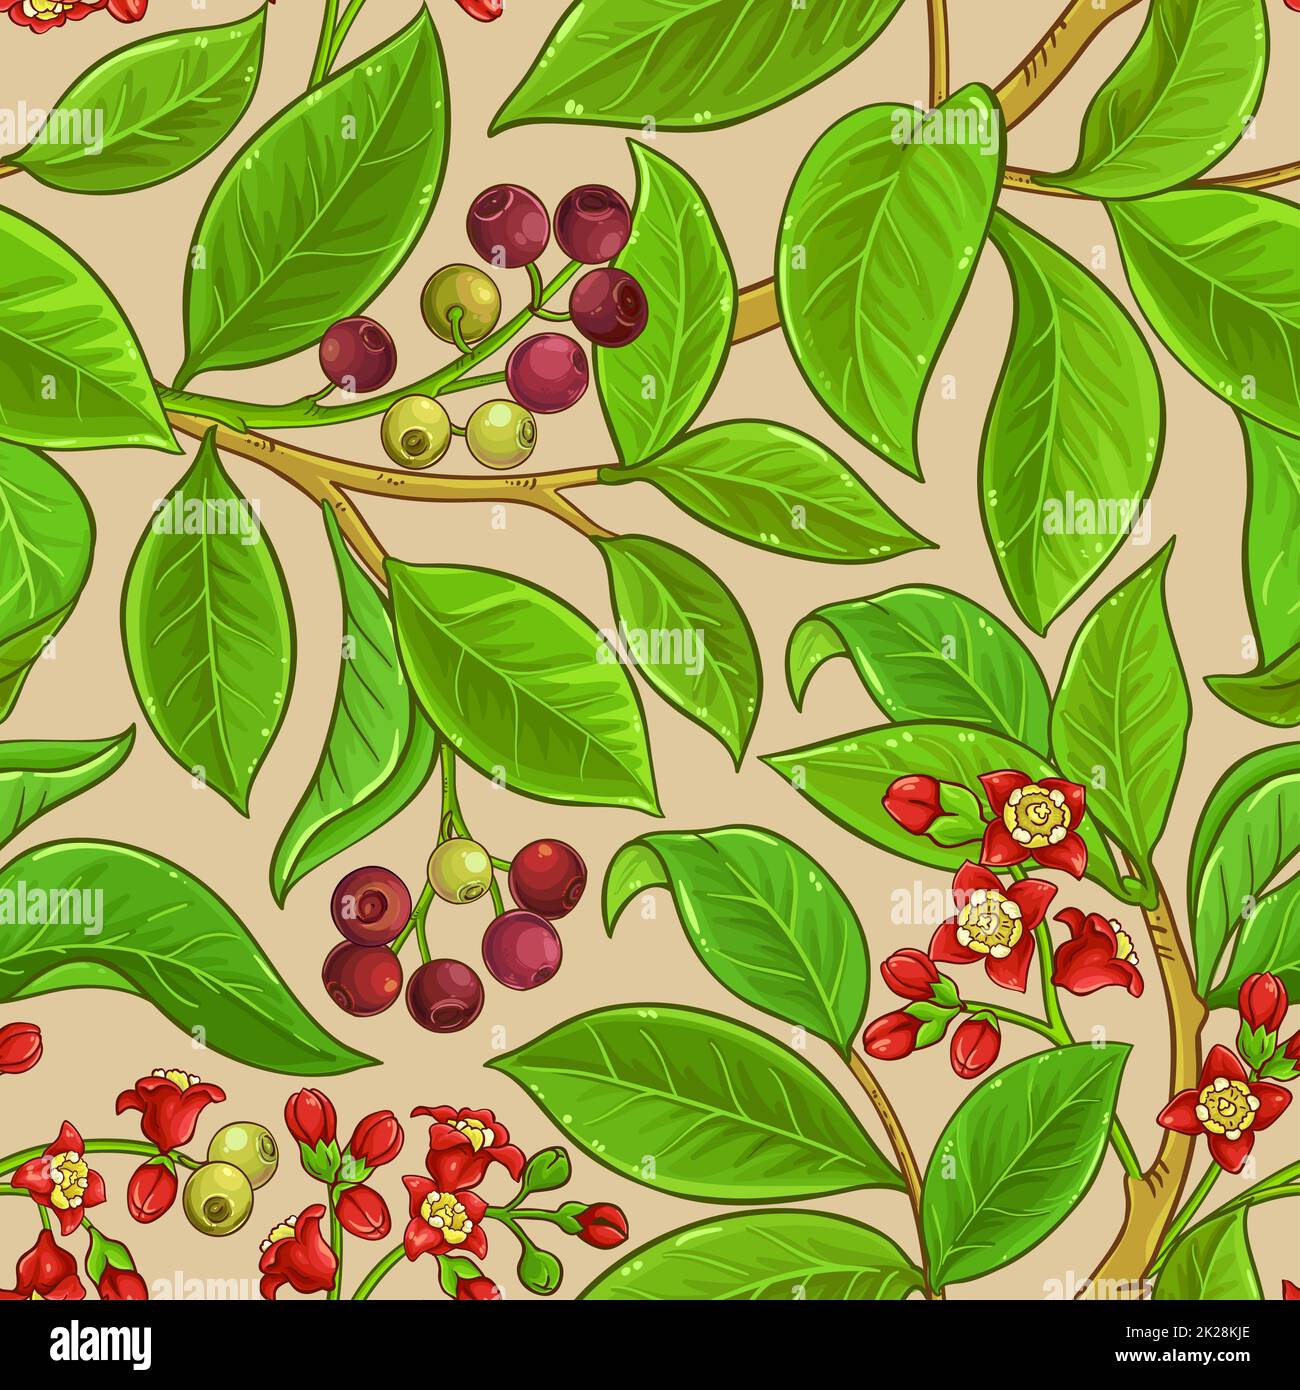 sandalwood branches vector pattern Stock Photo